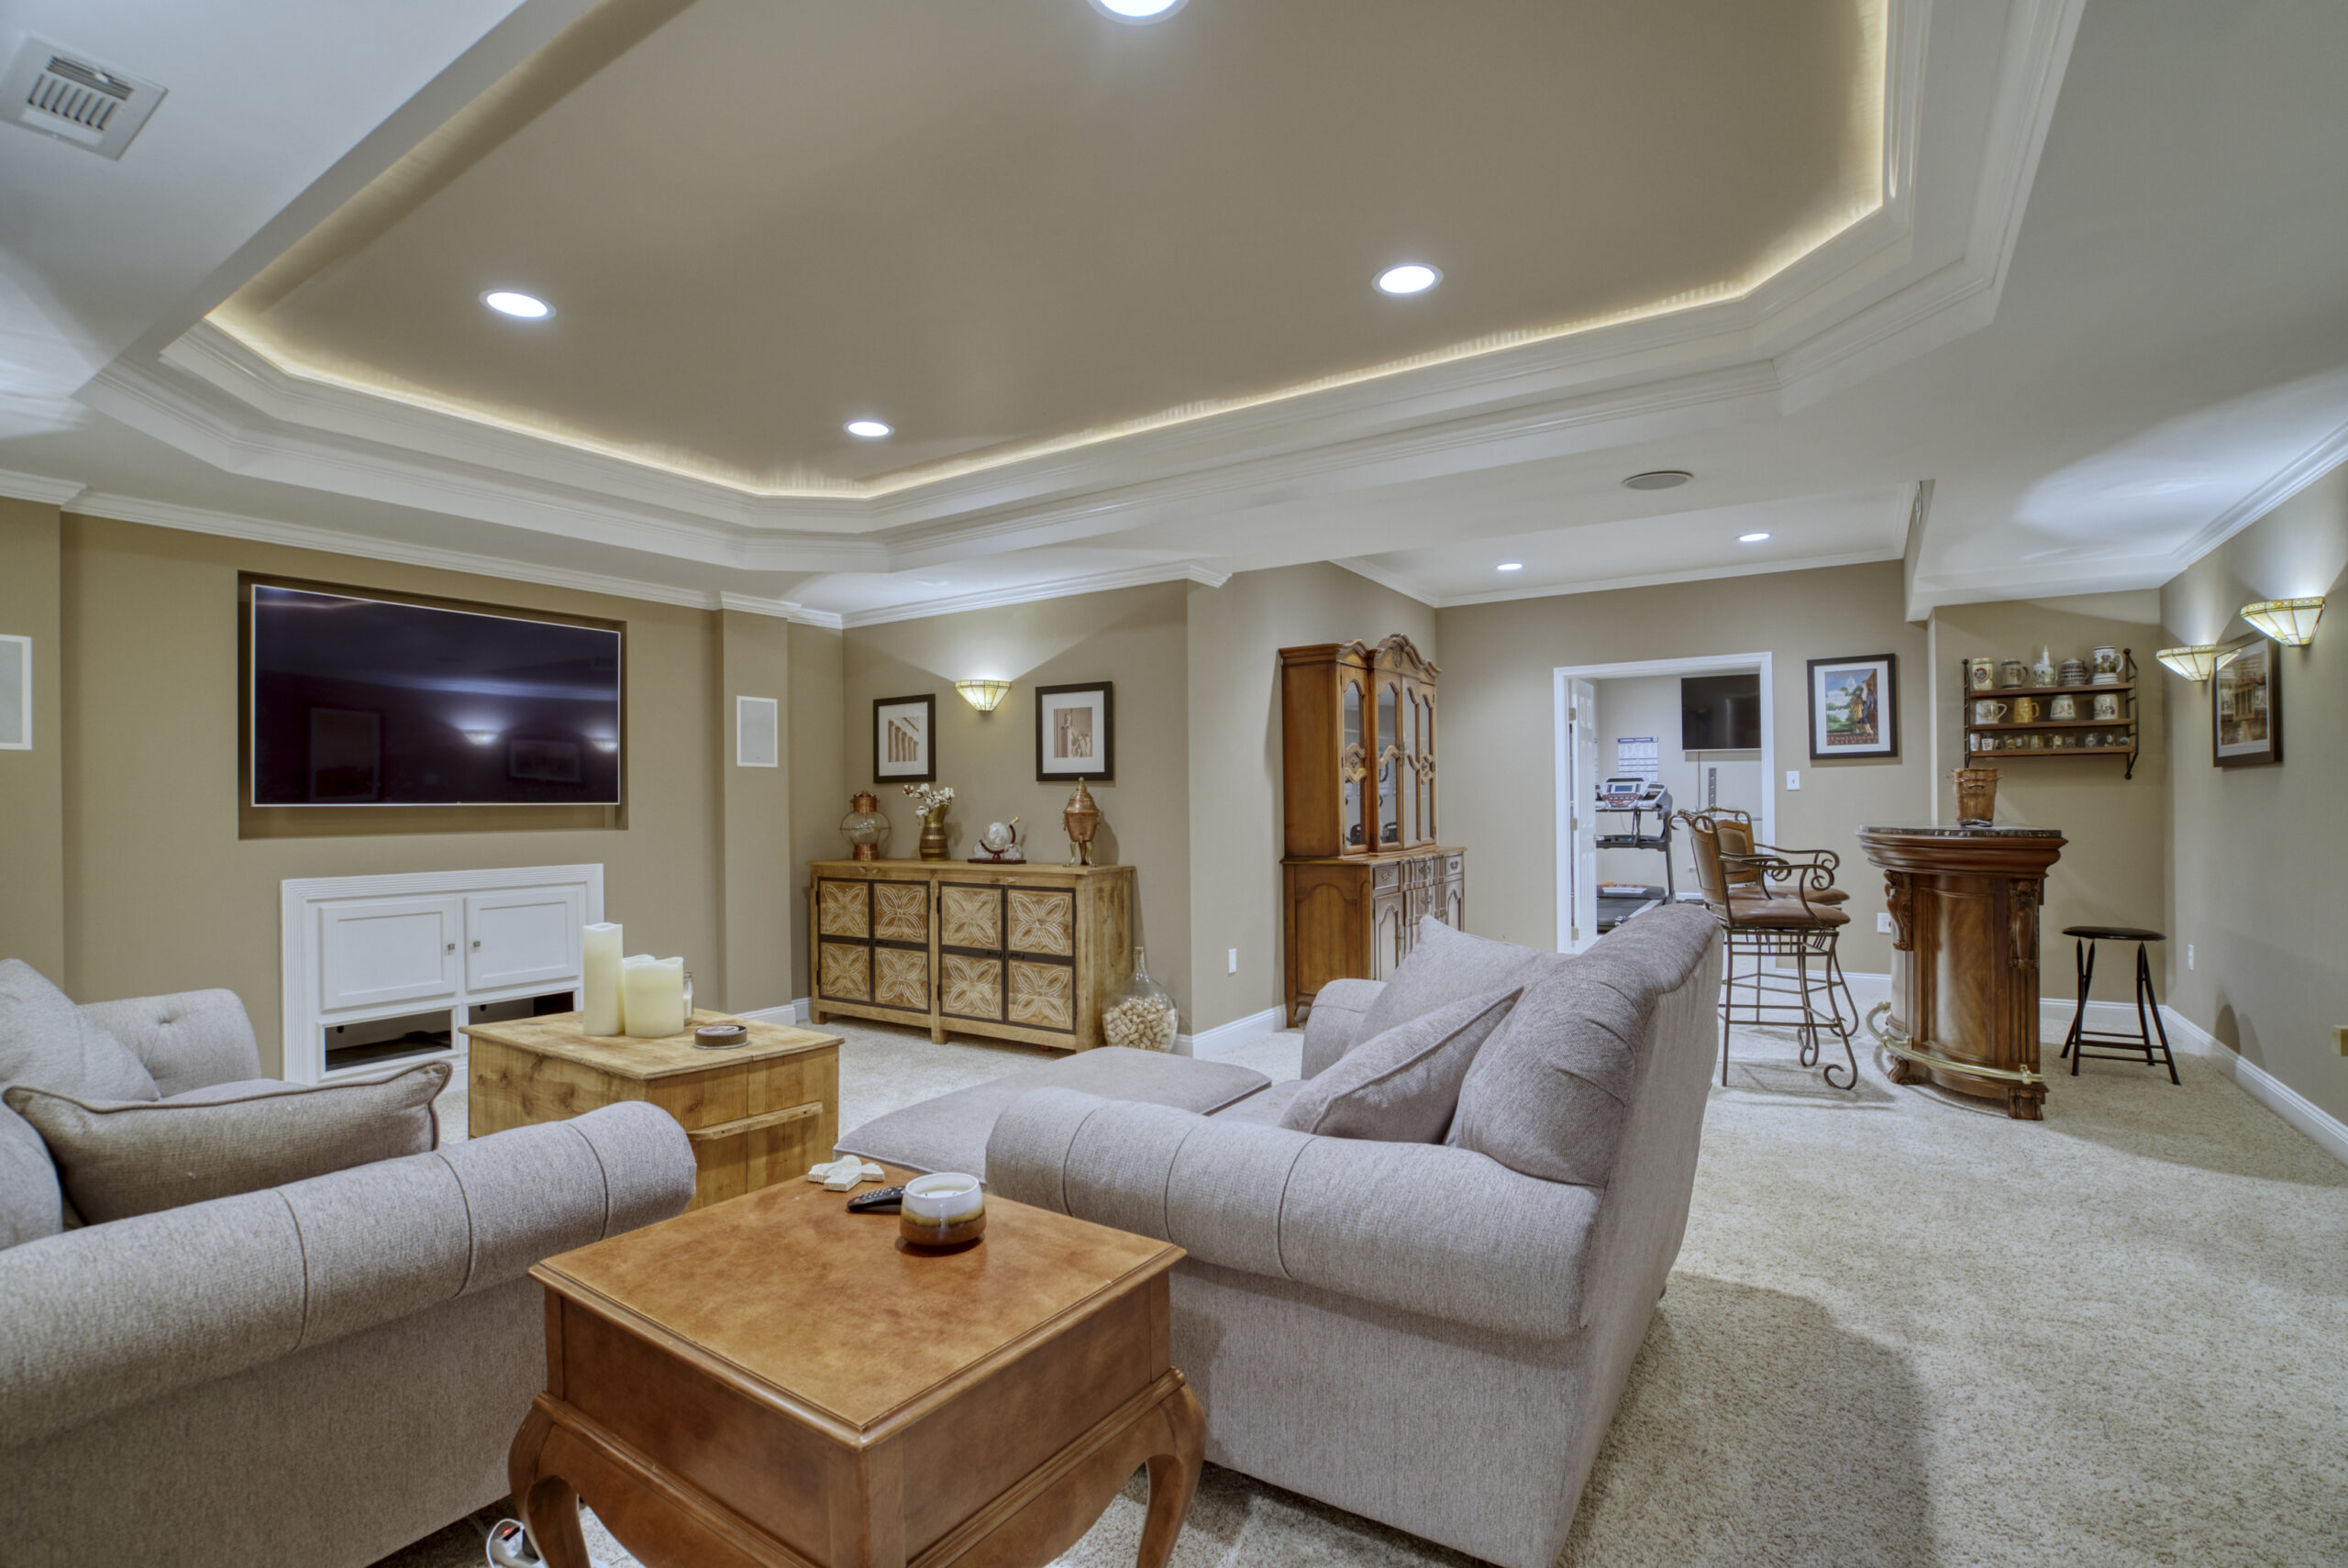 Professional interior photo of 9701 Chilcott Manor Way - showing the basement media area with trey ceiling and bar in the background